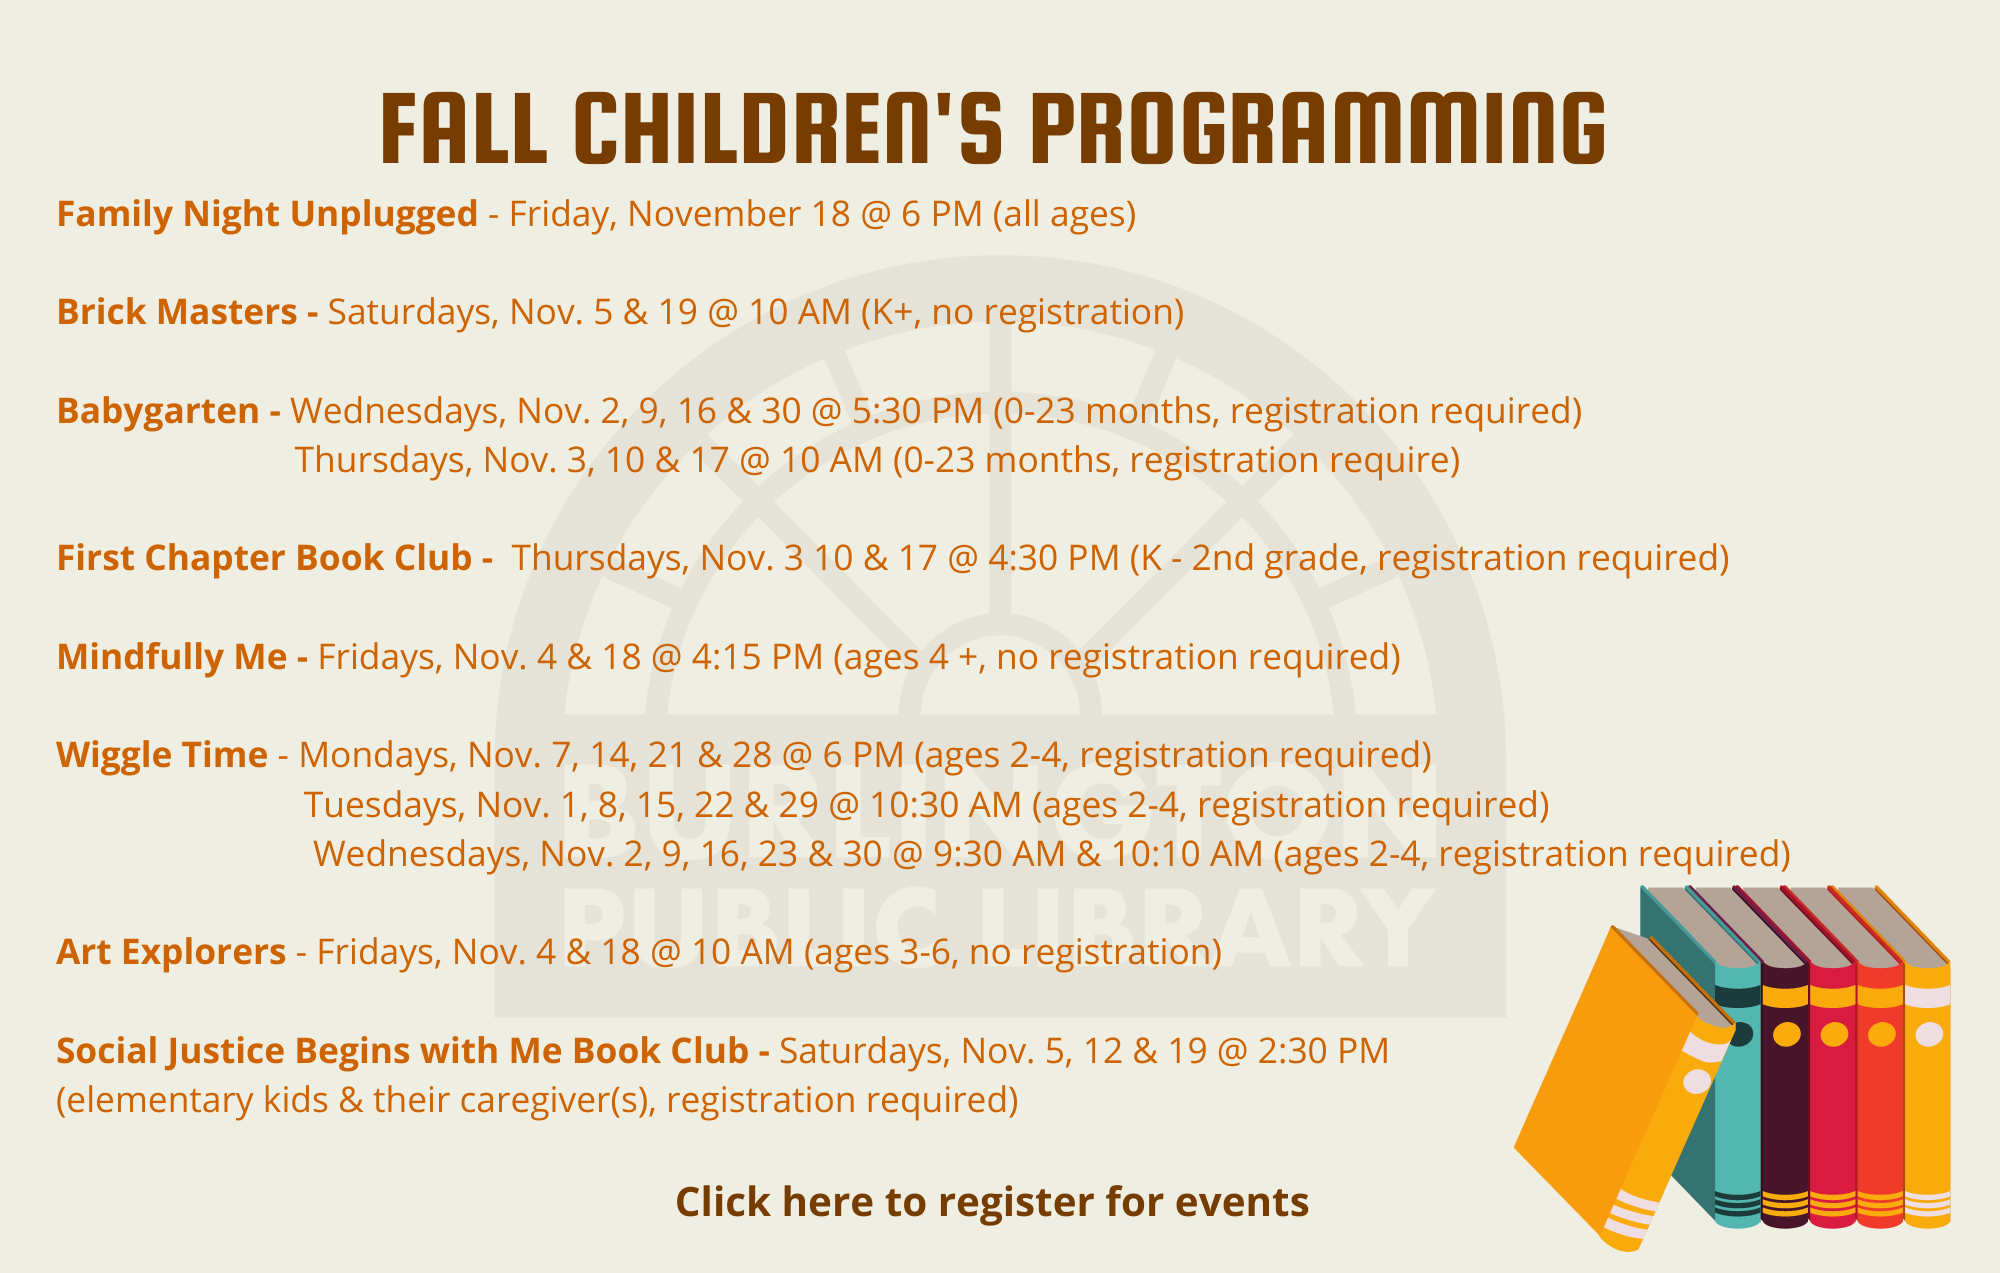 Click here to register for fall events